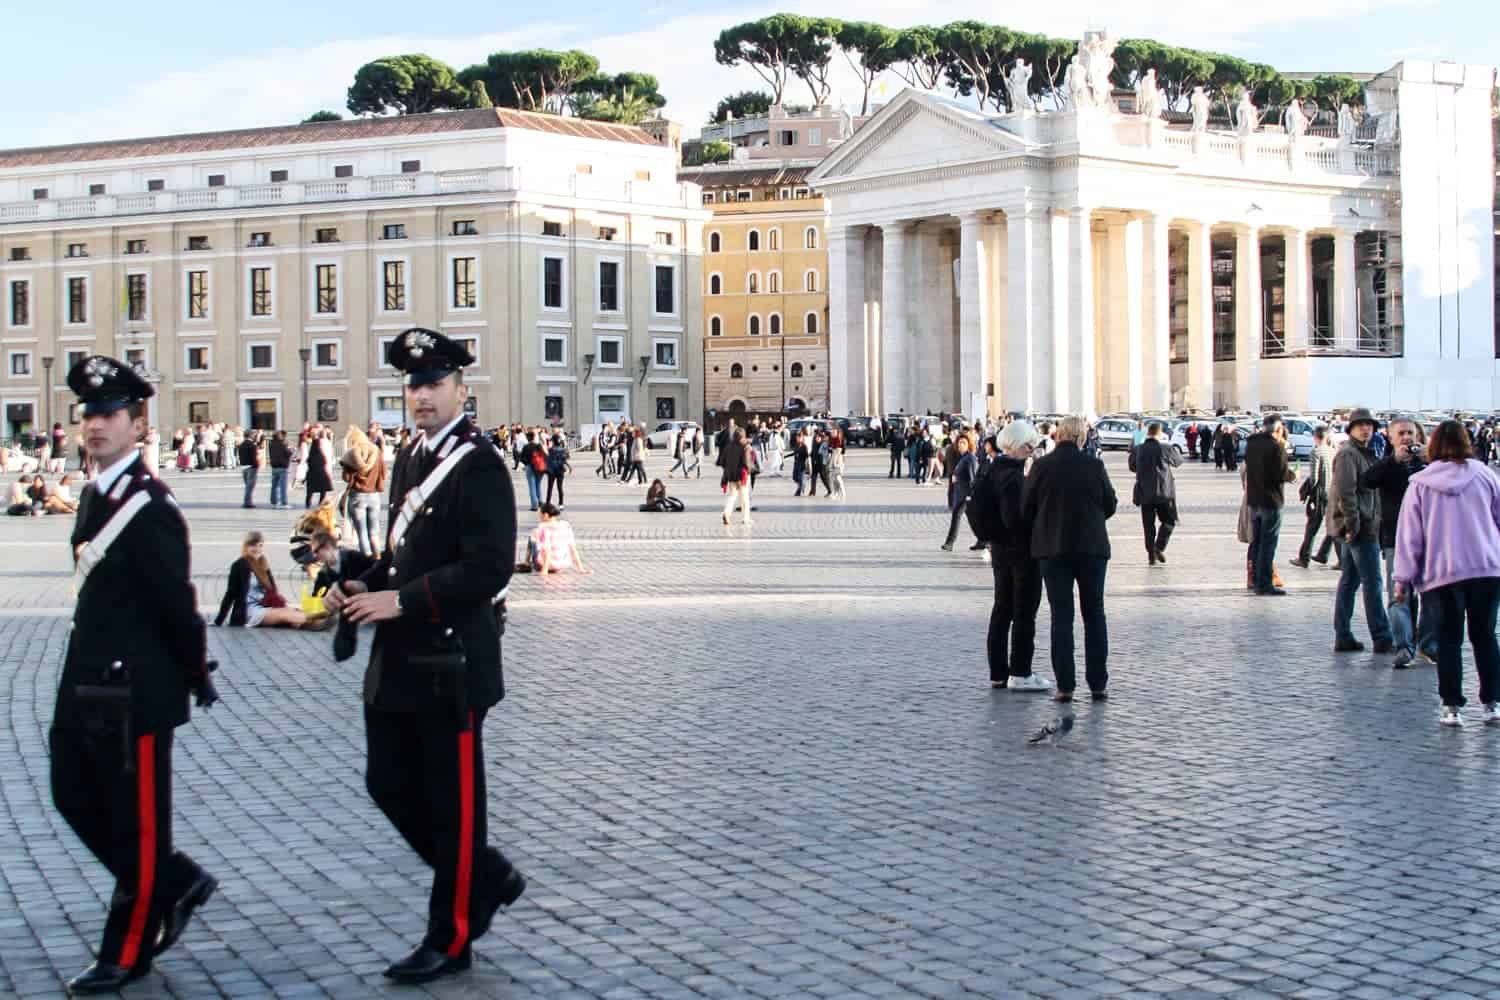 St. Peter's Square Guards at the Vatican Museum, Rome